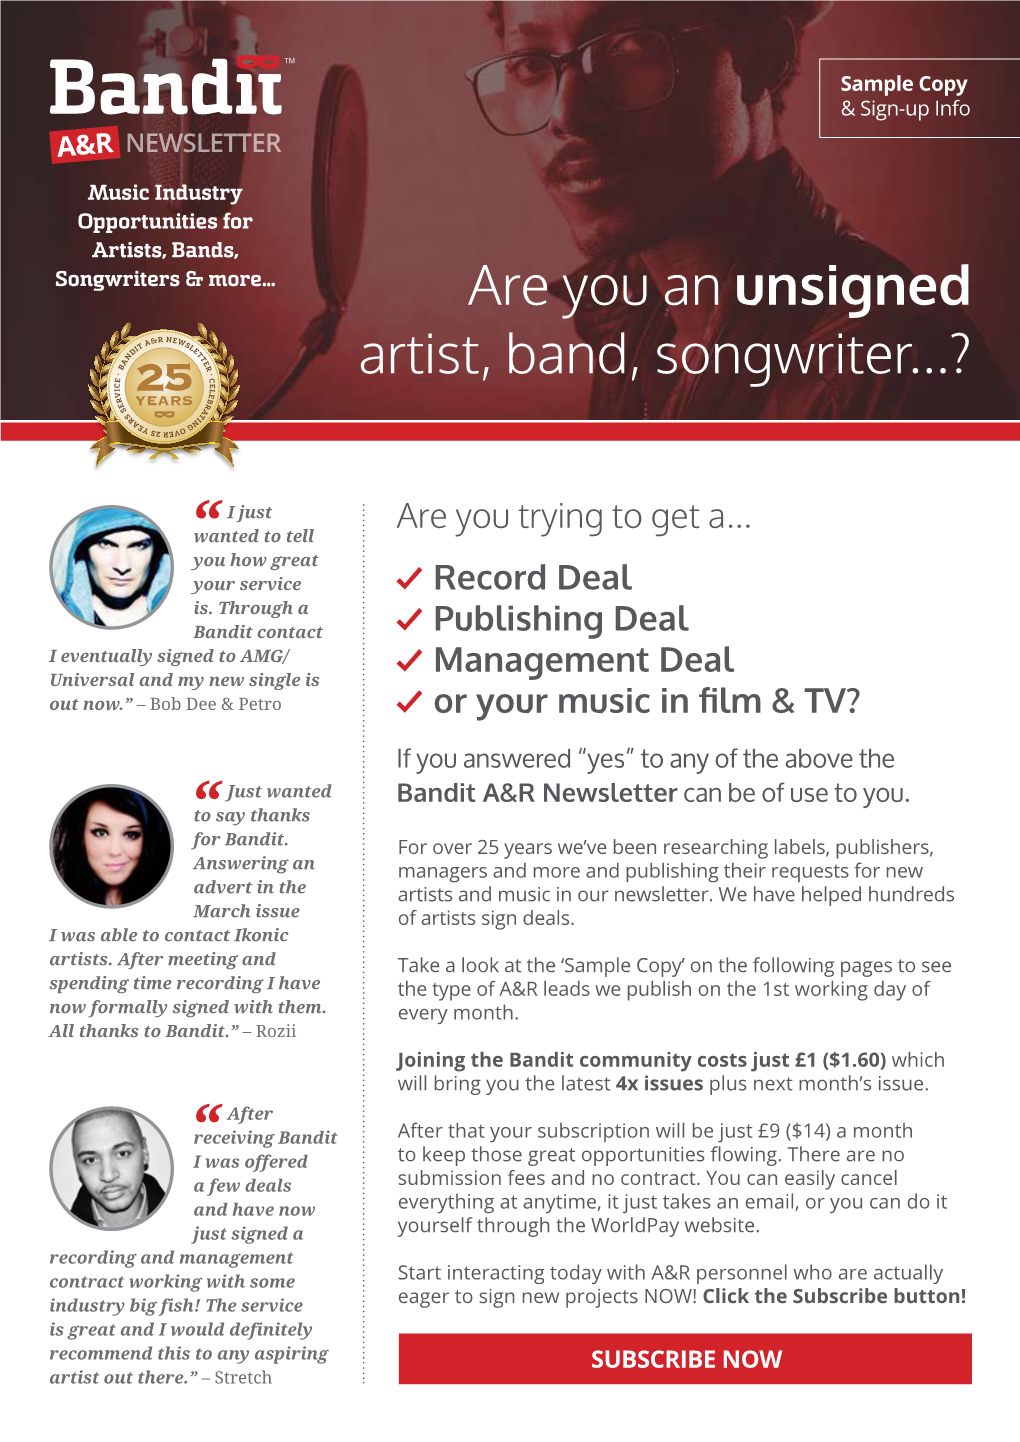 Are You an Unsigned Artist, Band, Songwriter...?